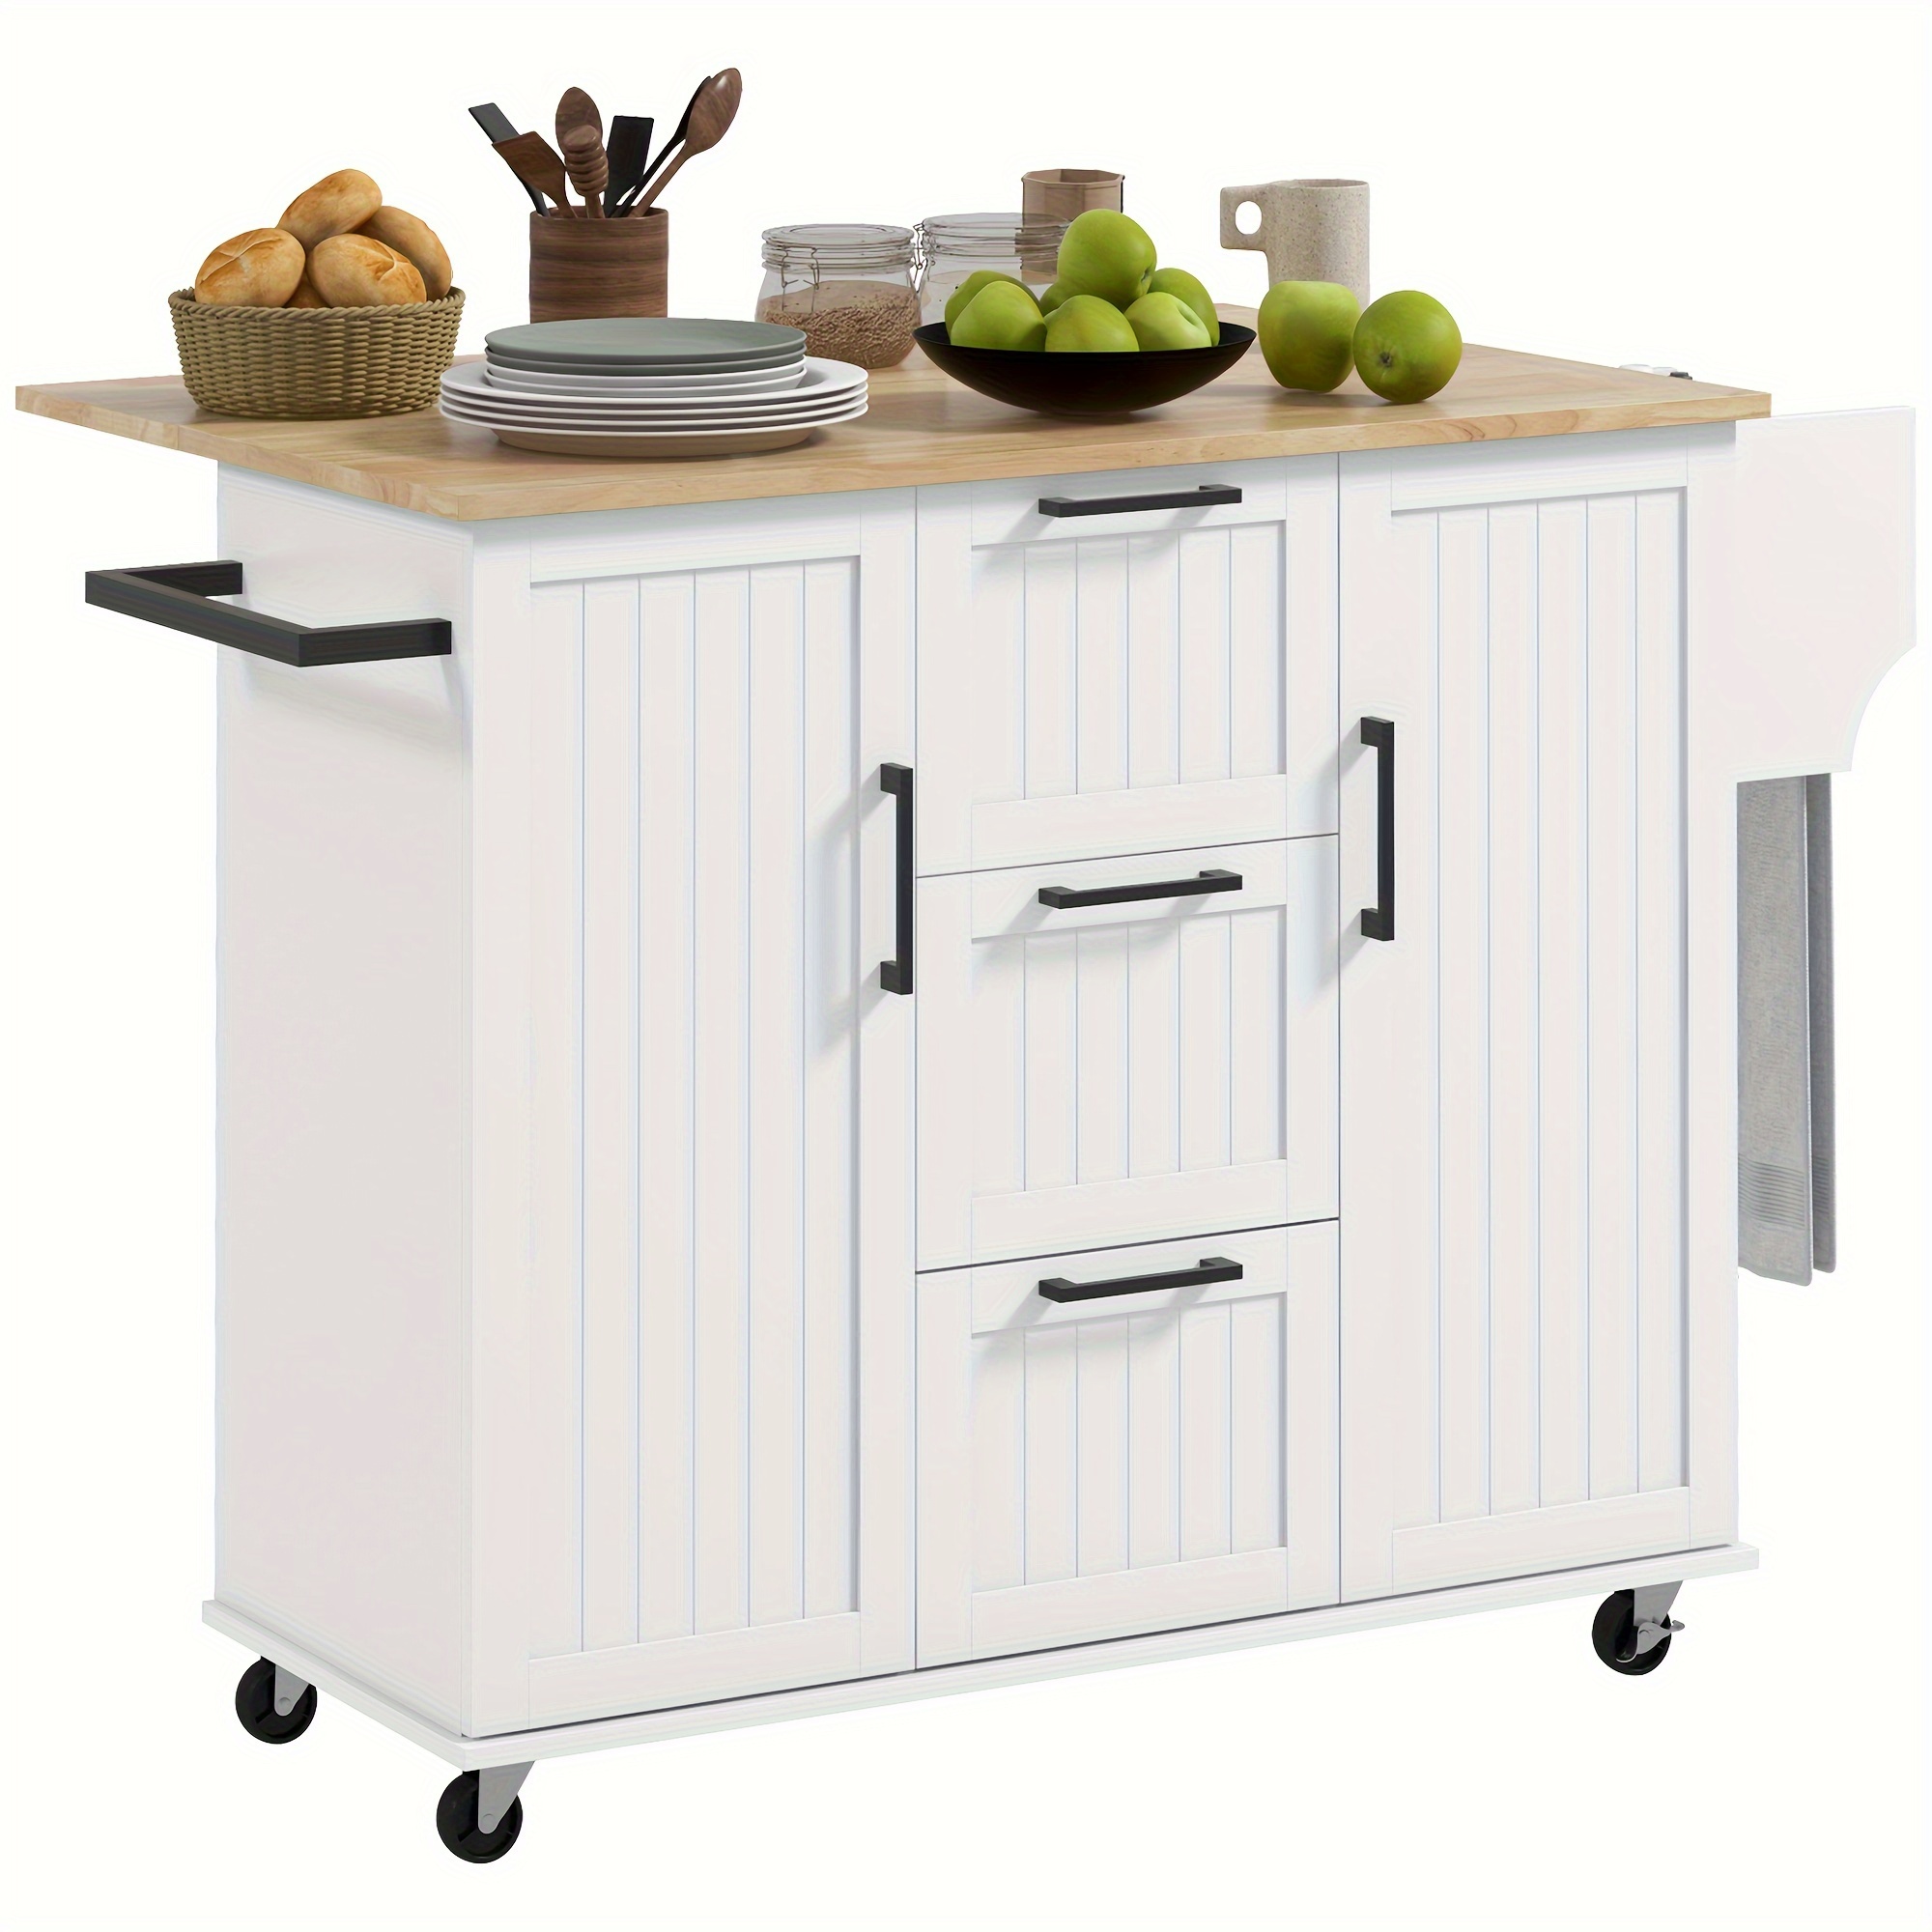 

Kitchen Island With Drop Leaf, Rolling Kitchen Cart On Wheels With 3 Drawers, 2 Cabinets, Natural Wood Top, Spice Rack And Towel Rack, White